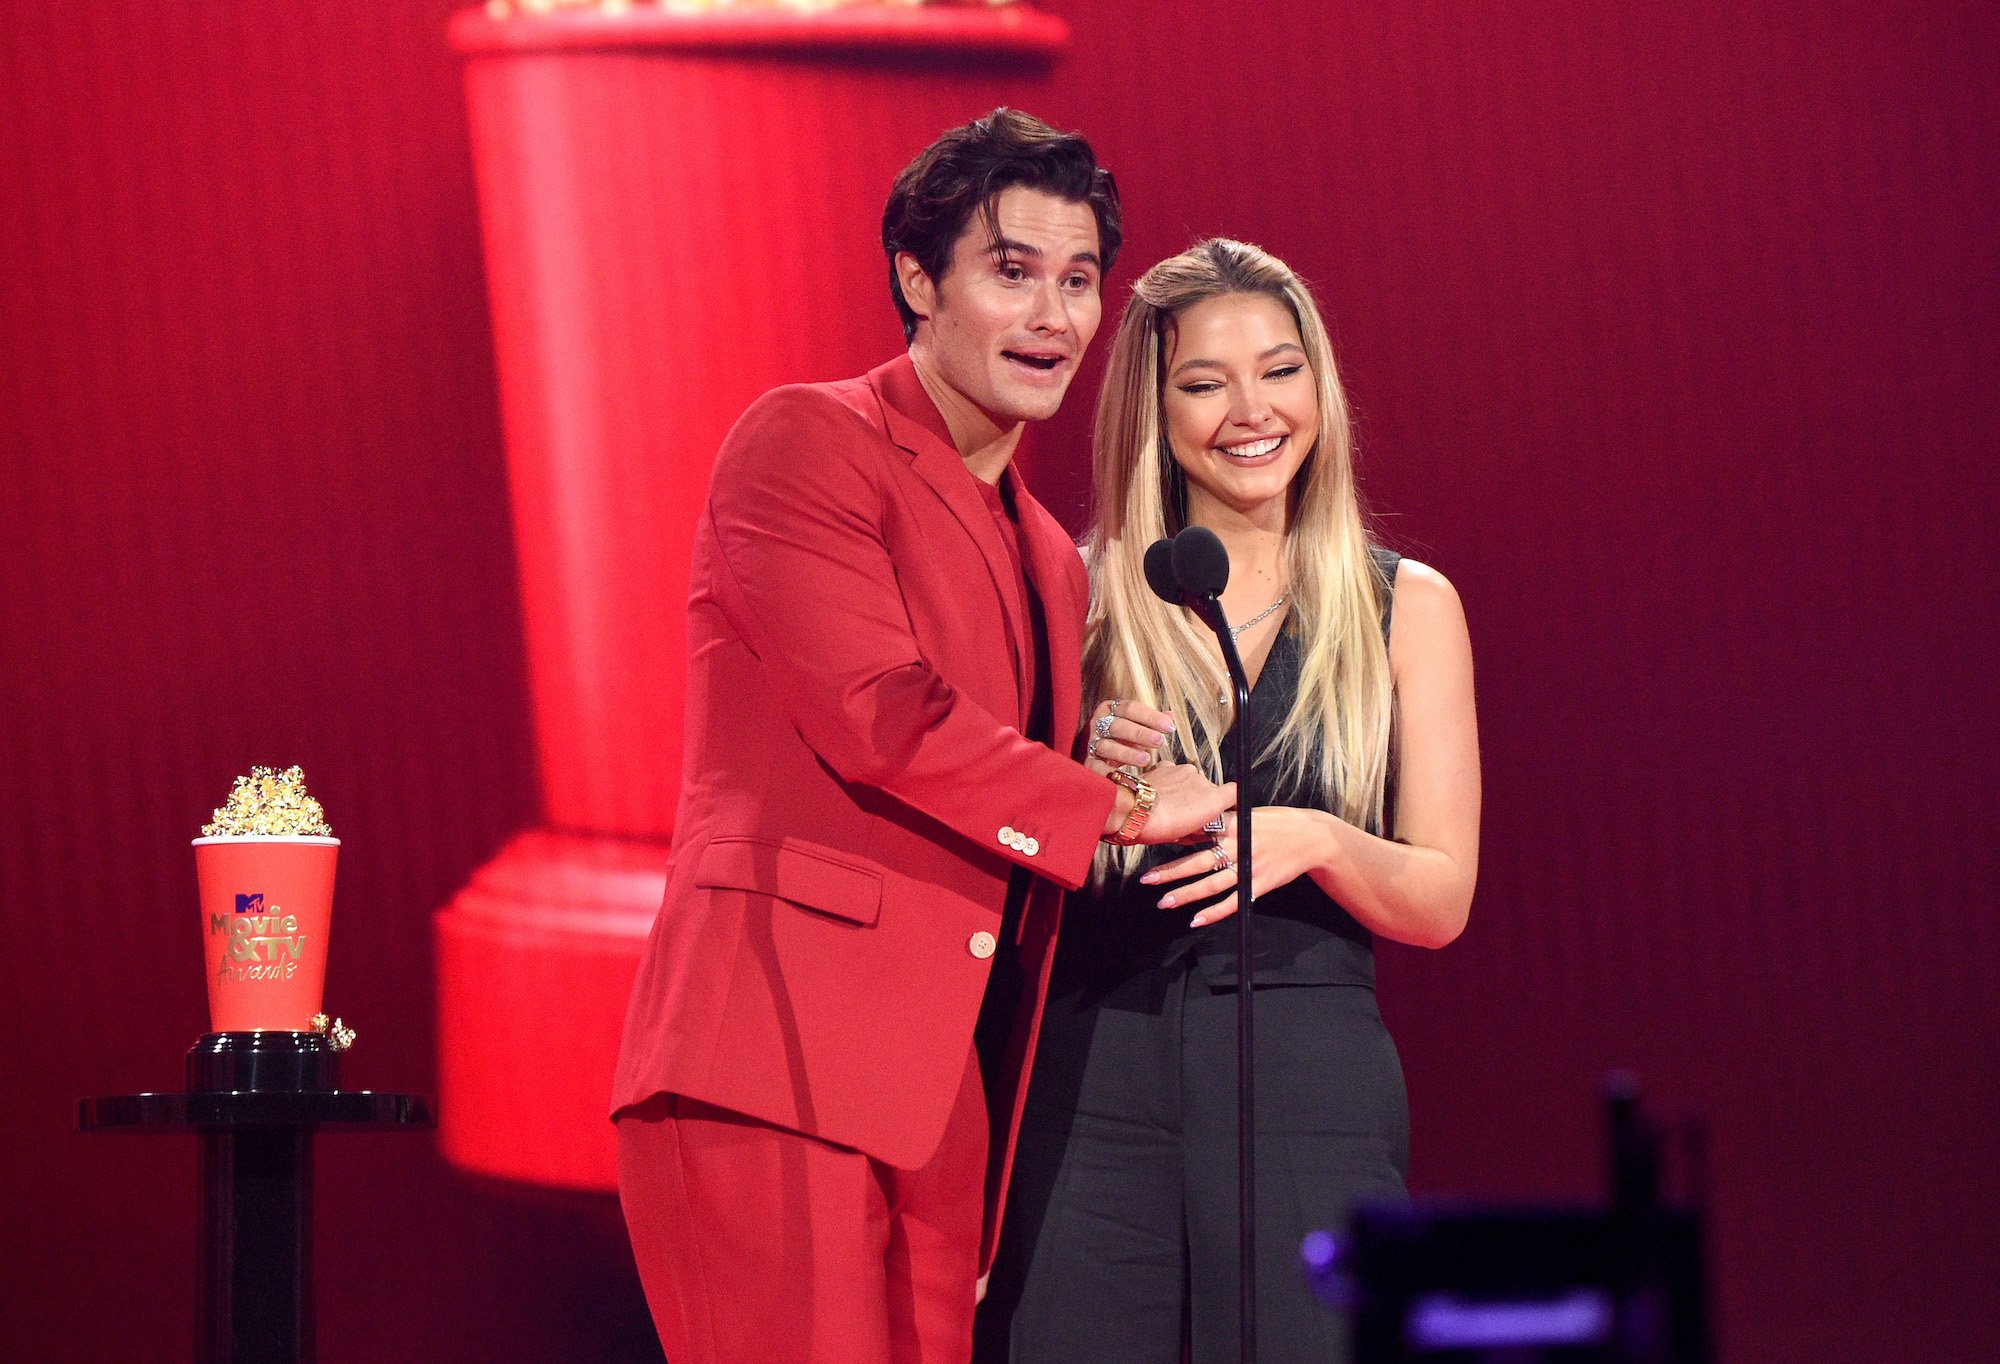 Chase Stokes and Madelyn Cline accepting an award at the 2021 MTV Movie & TV Awards